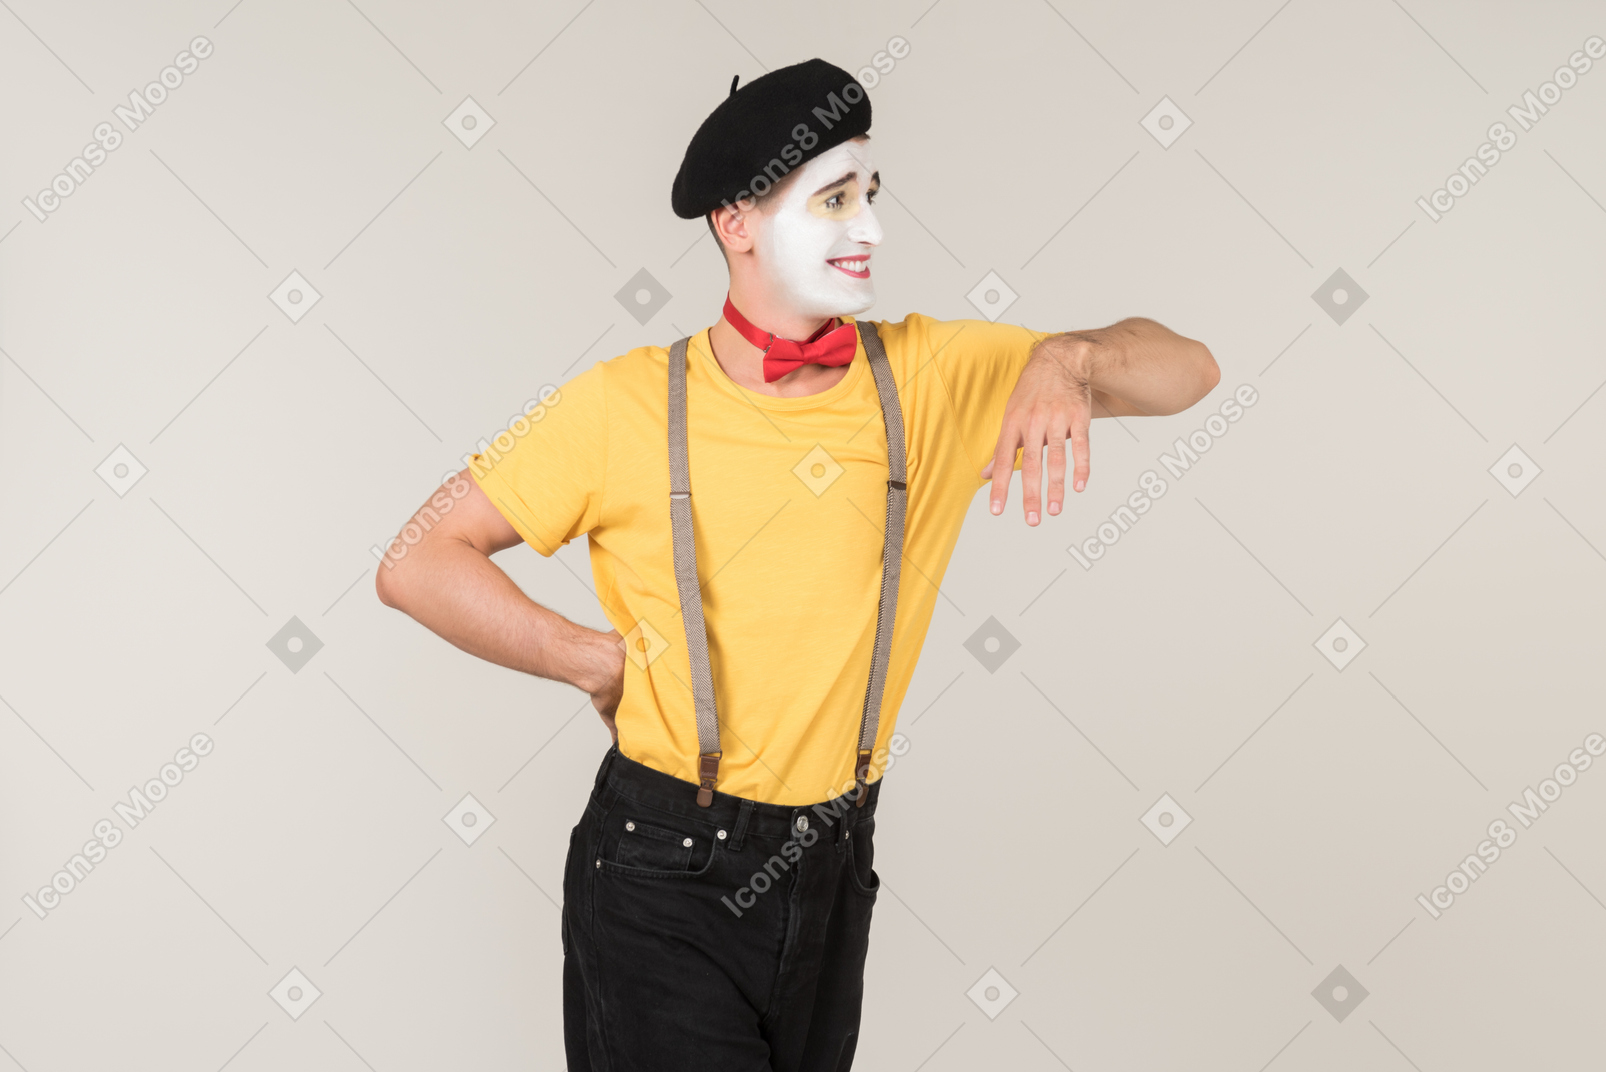 Male mime leaning on invisible object